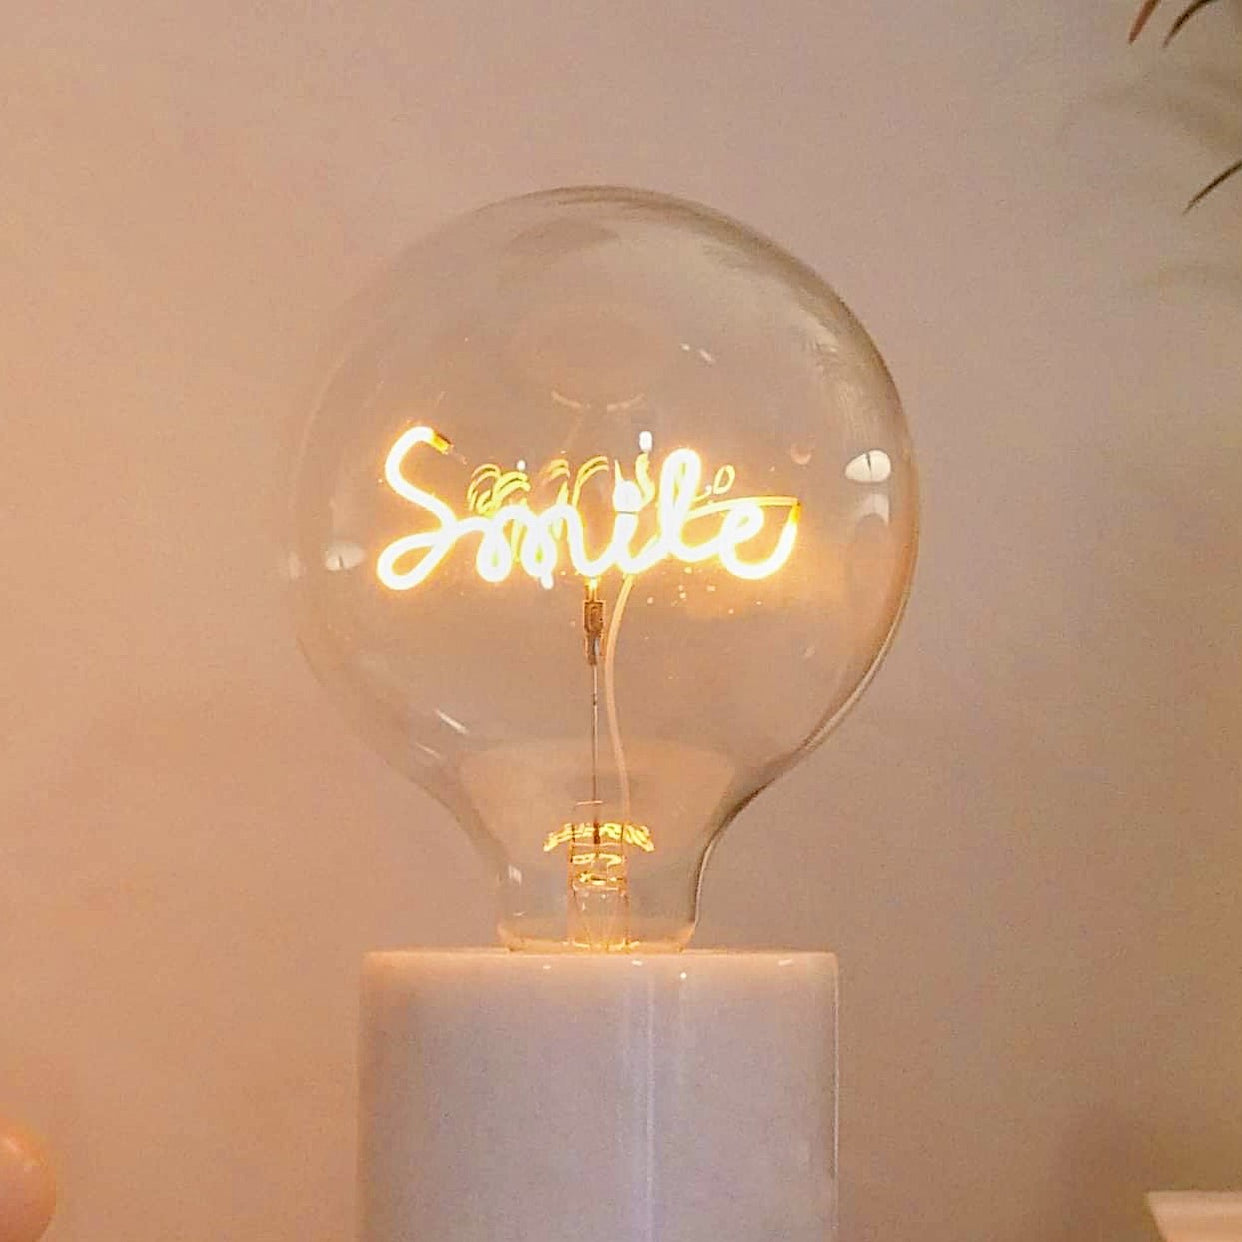 Smile LED Light Bulb - Screw Down Table Top Fitting - E27 Edison Dimmable